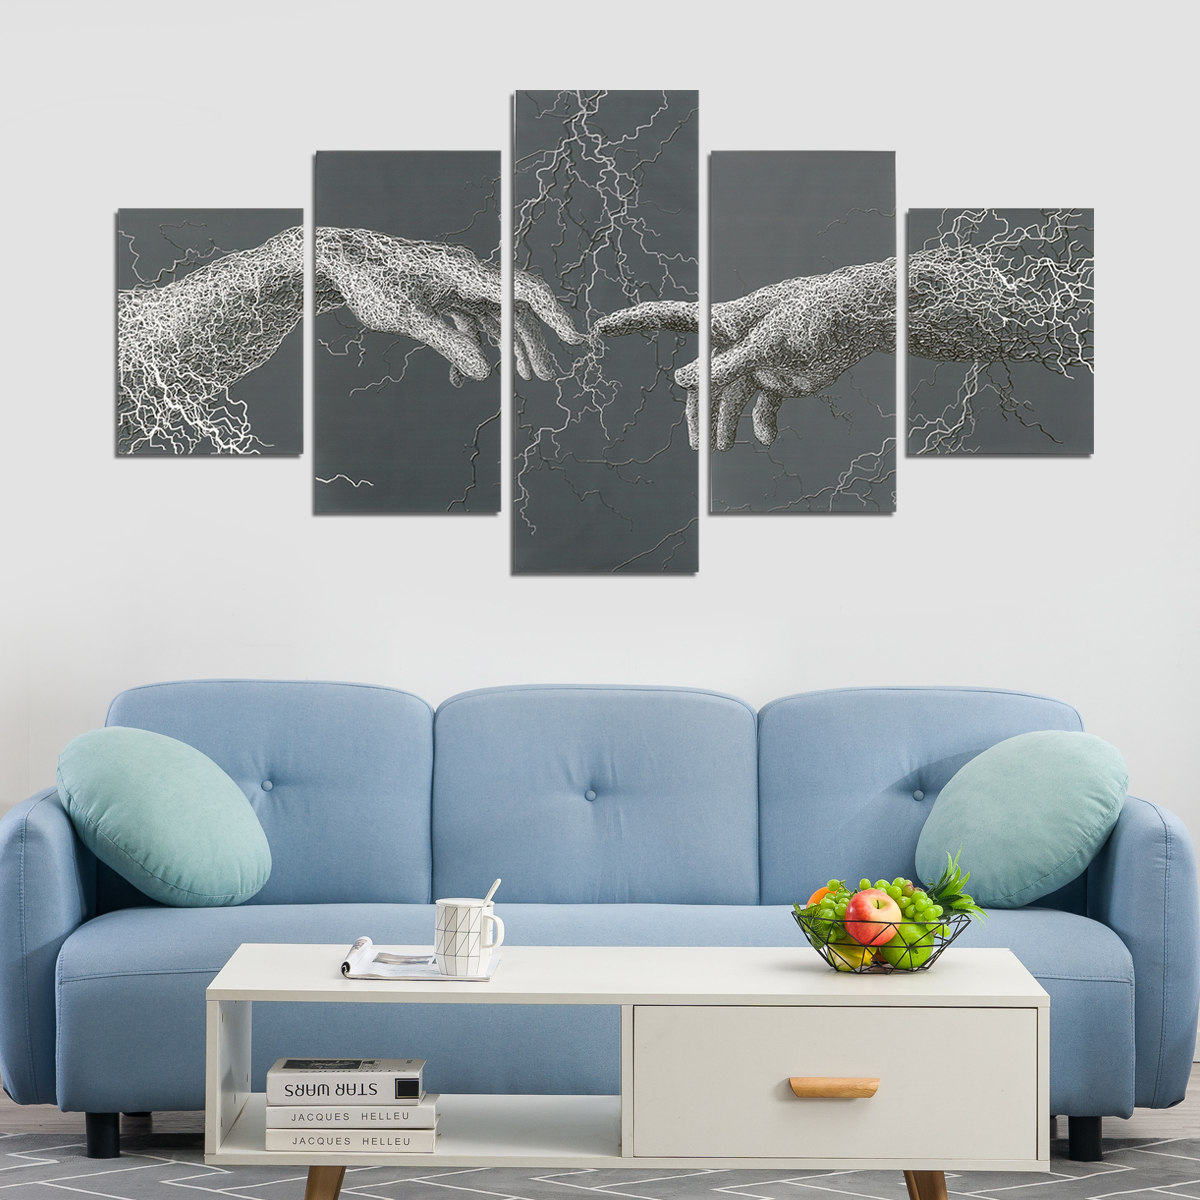 5Pcs-Canvas-Print-Paintings-Scenery-Oil-Painting-Wall-Decorative-Printing-Art-Picture-Frameless-Home-1758668-10